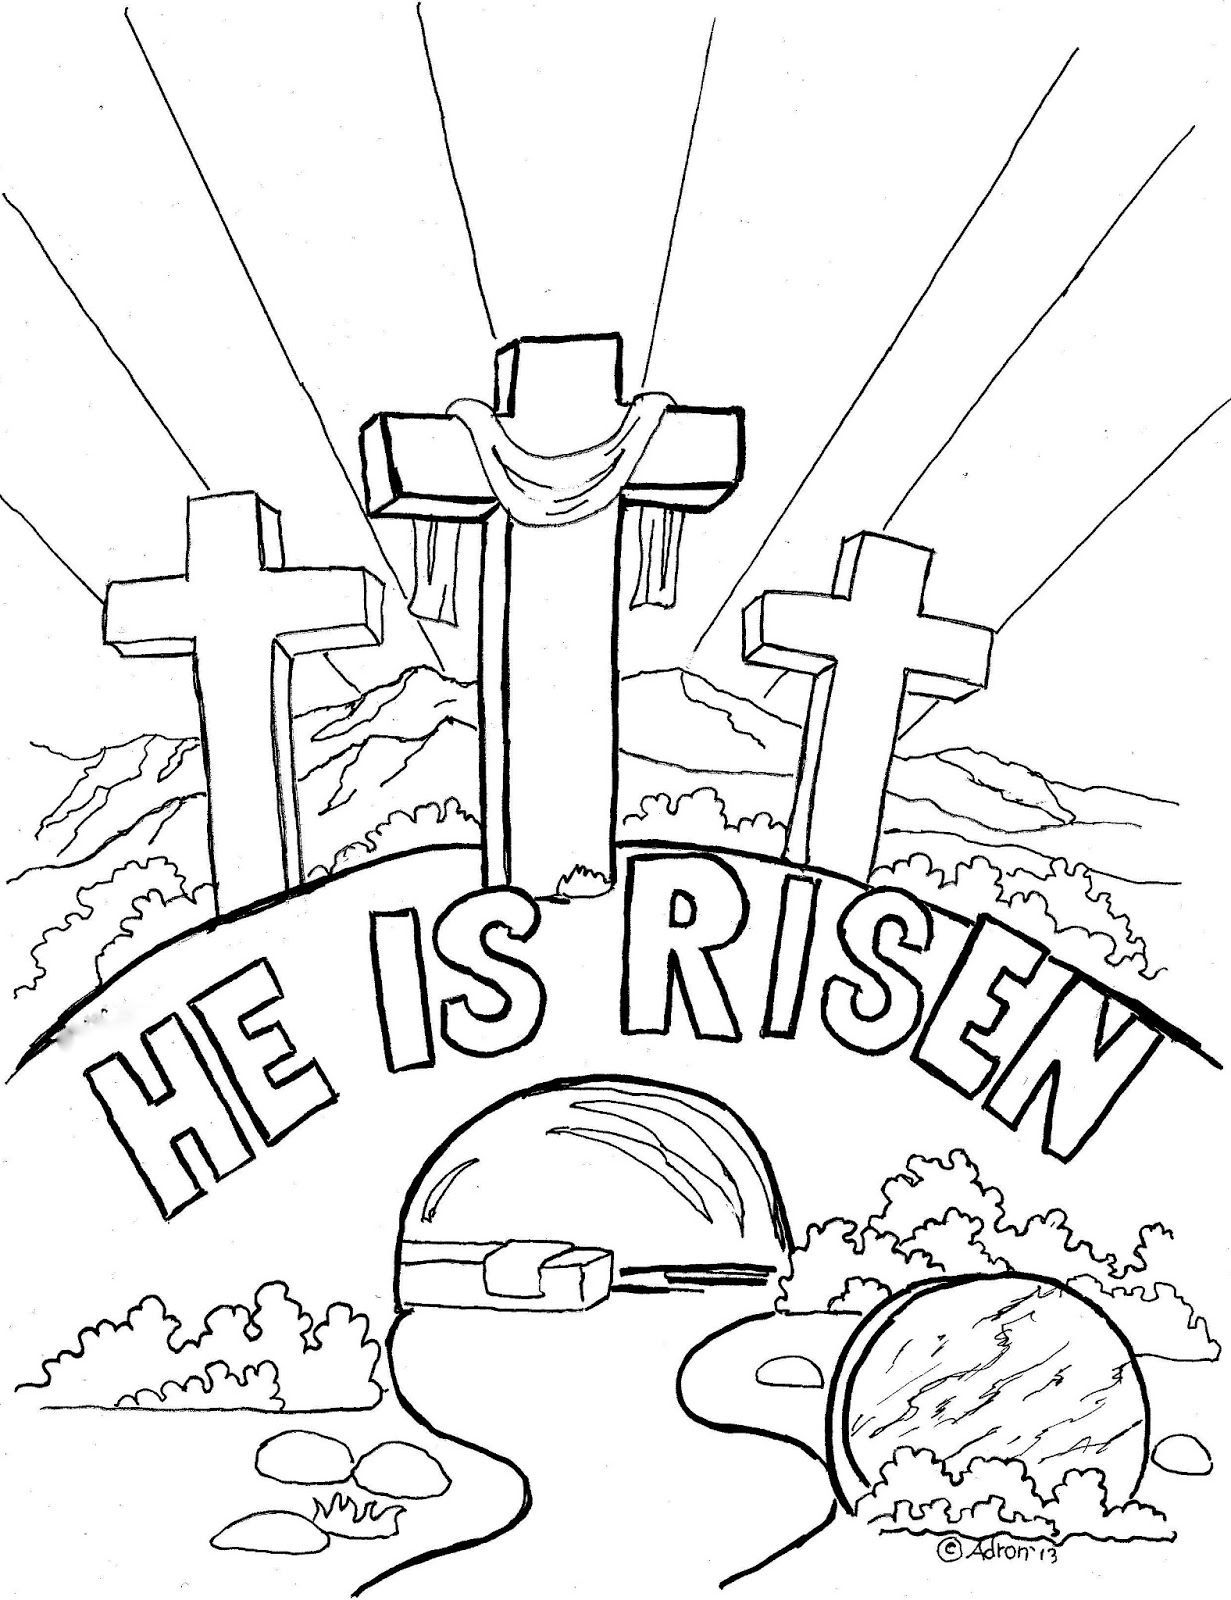 Coloring Pages for Kids by Mr. Adron: Easter Coloring Page For Kids, “He is Risen”